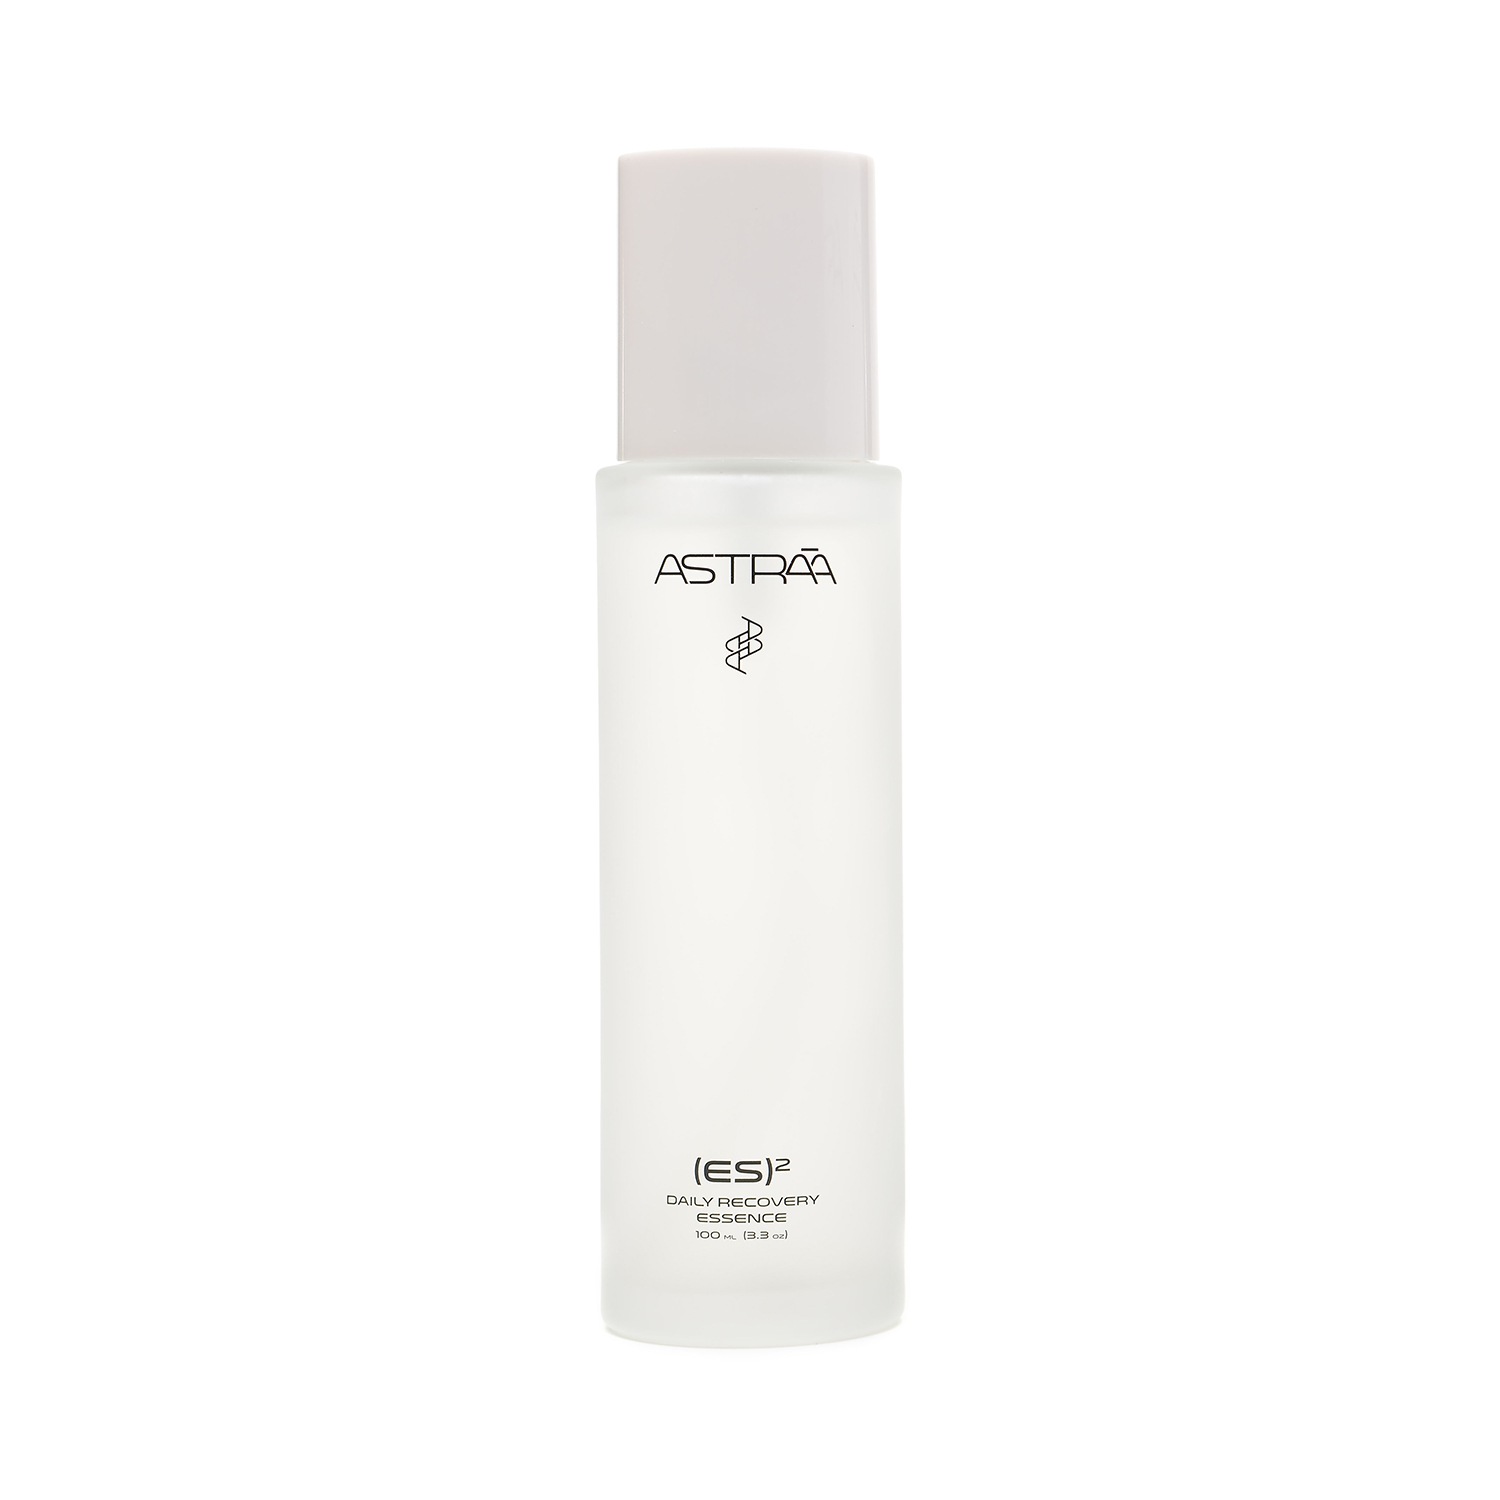 ASTRAA Daily Recovery Essence